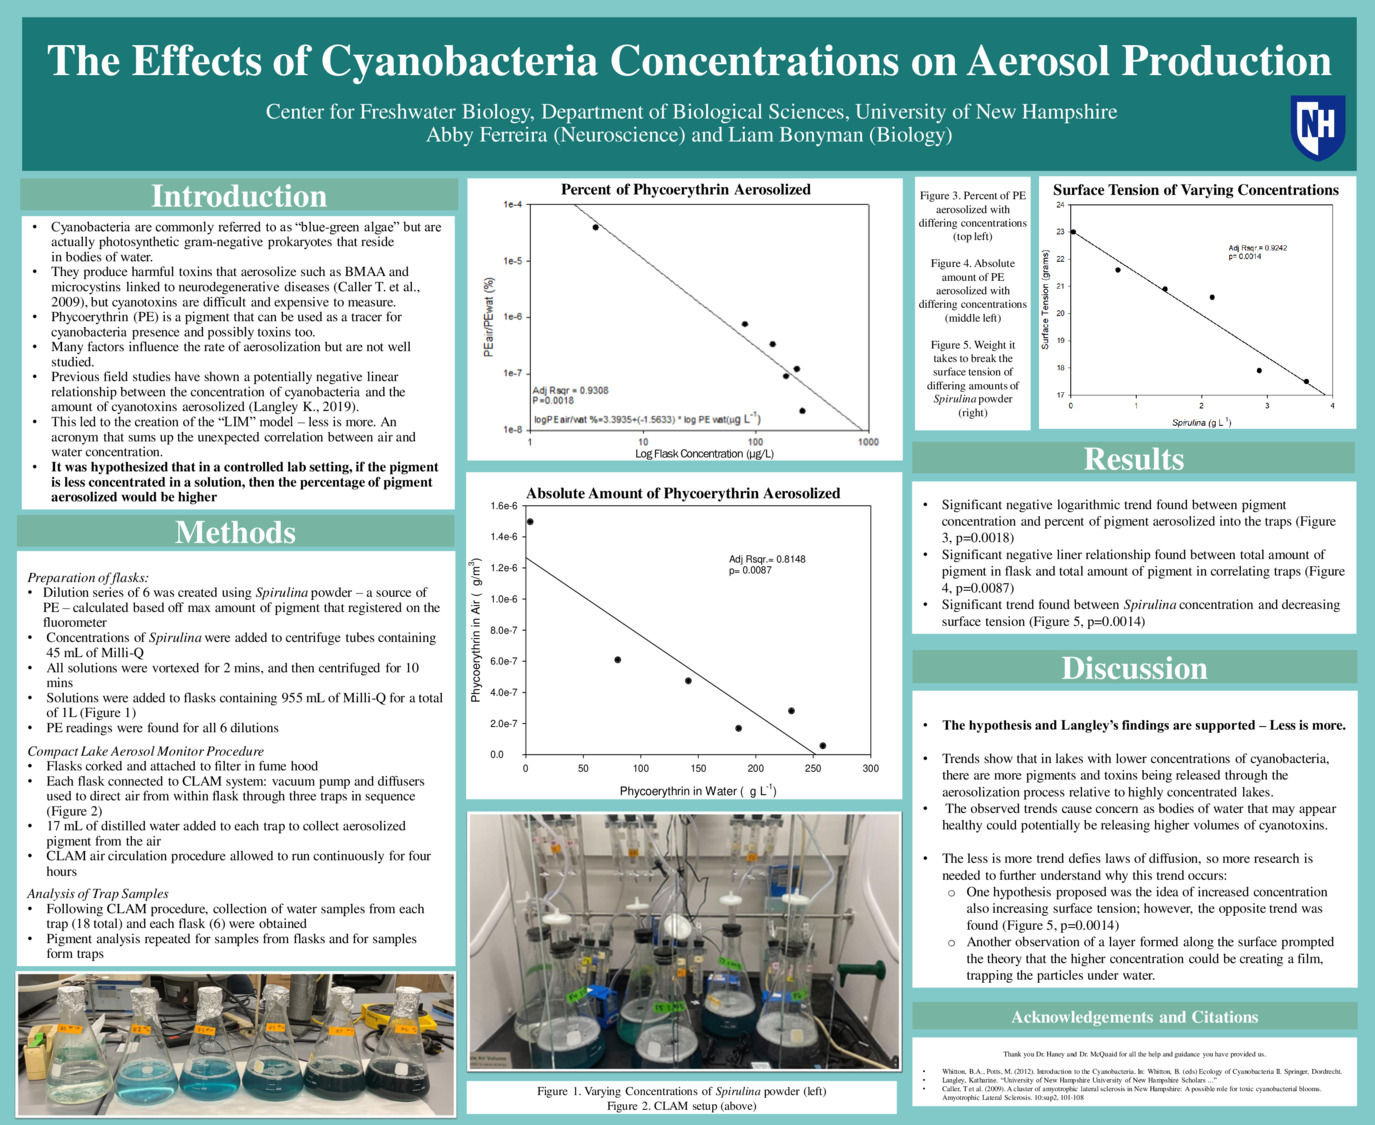 The Effects Of Cyanobacteria Concentrations On Aerosol Production by wrb1010